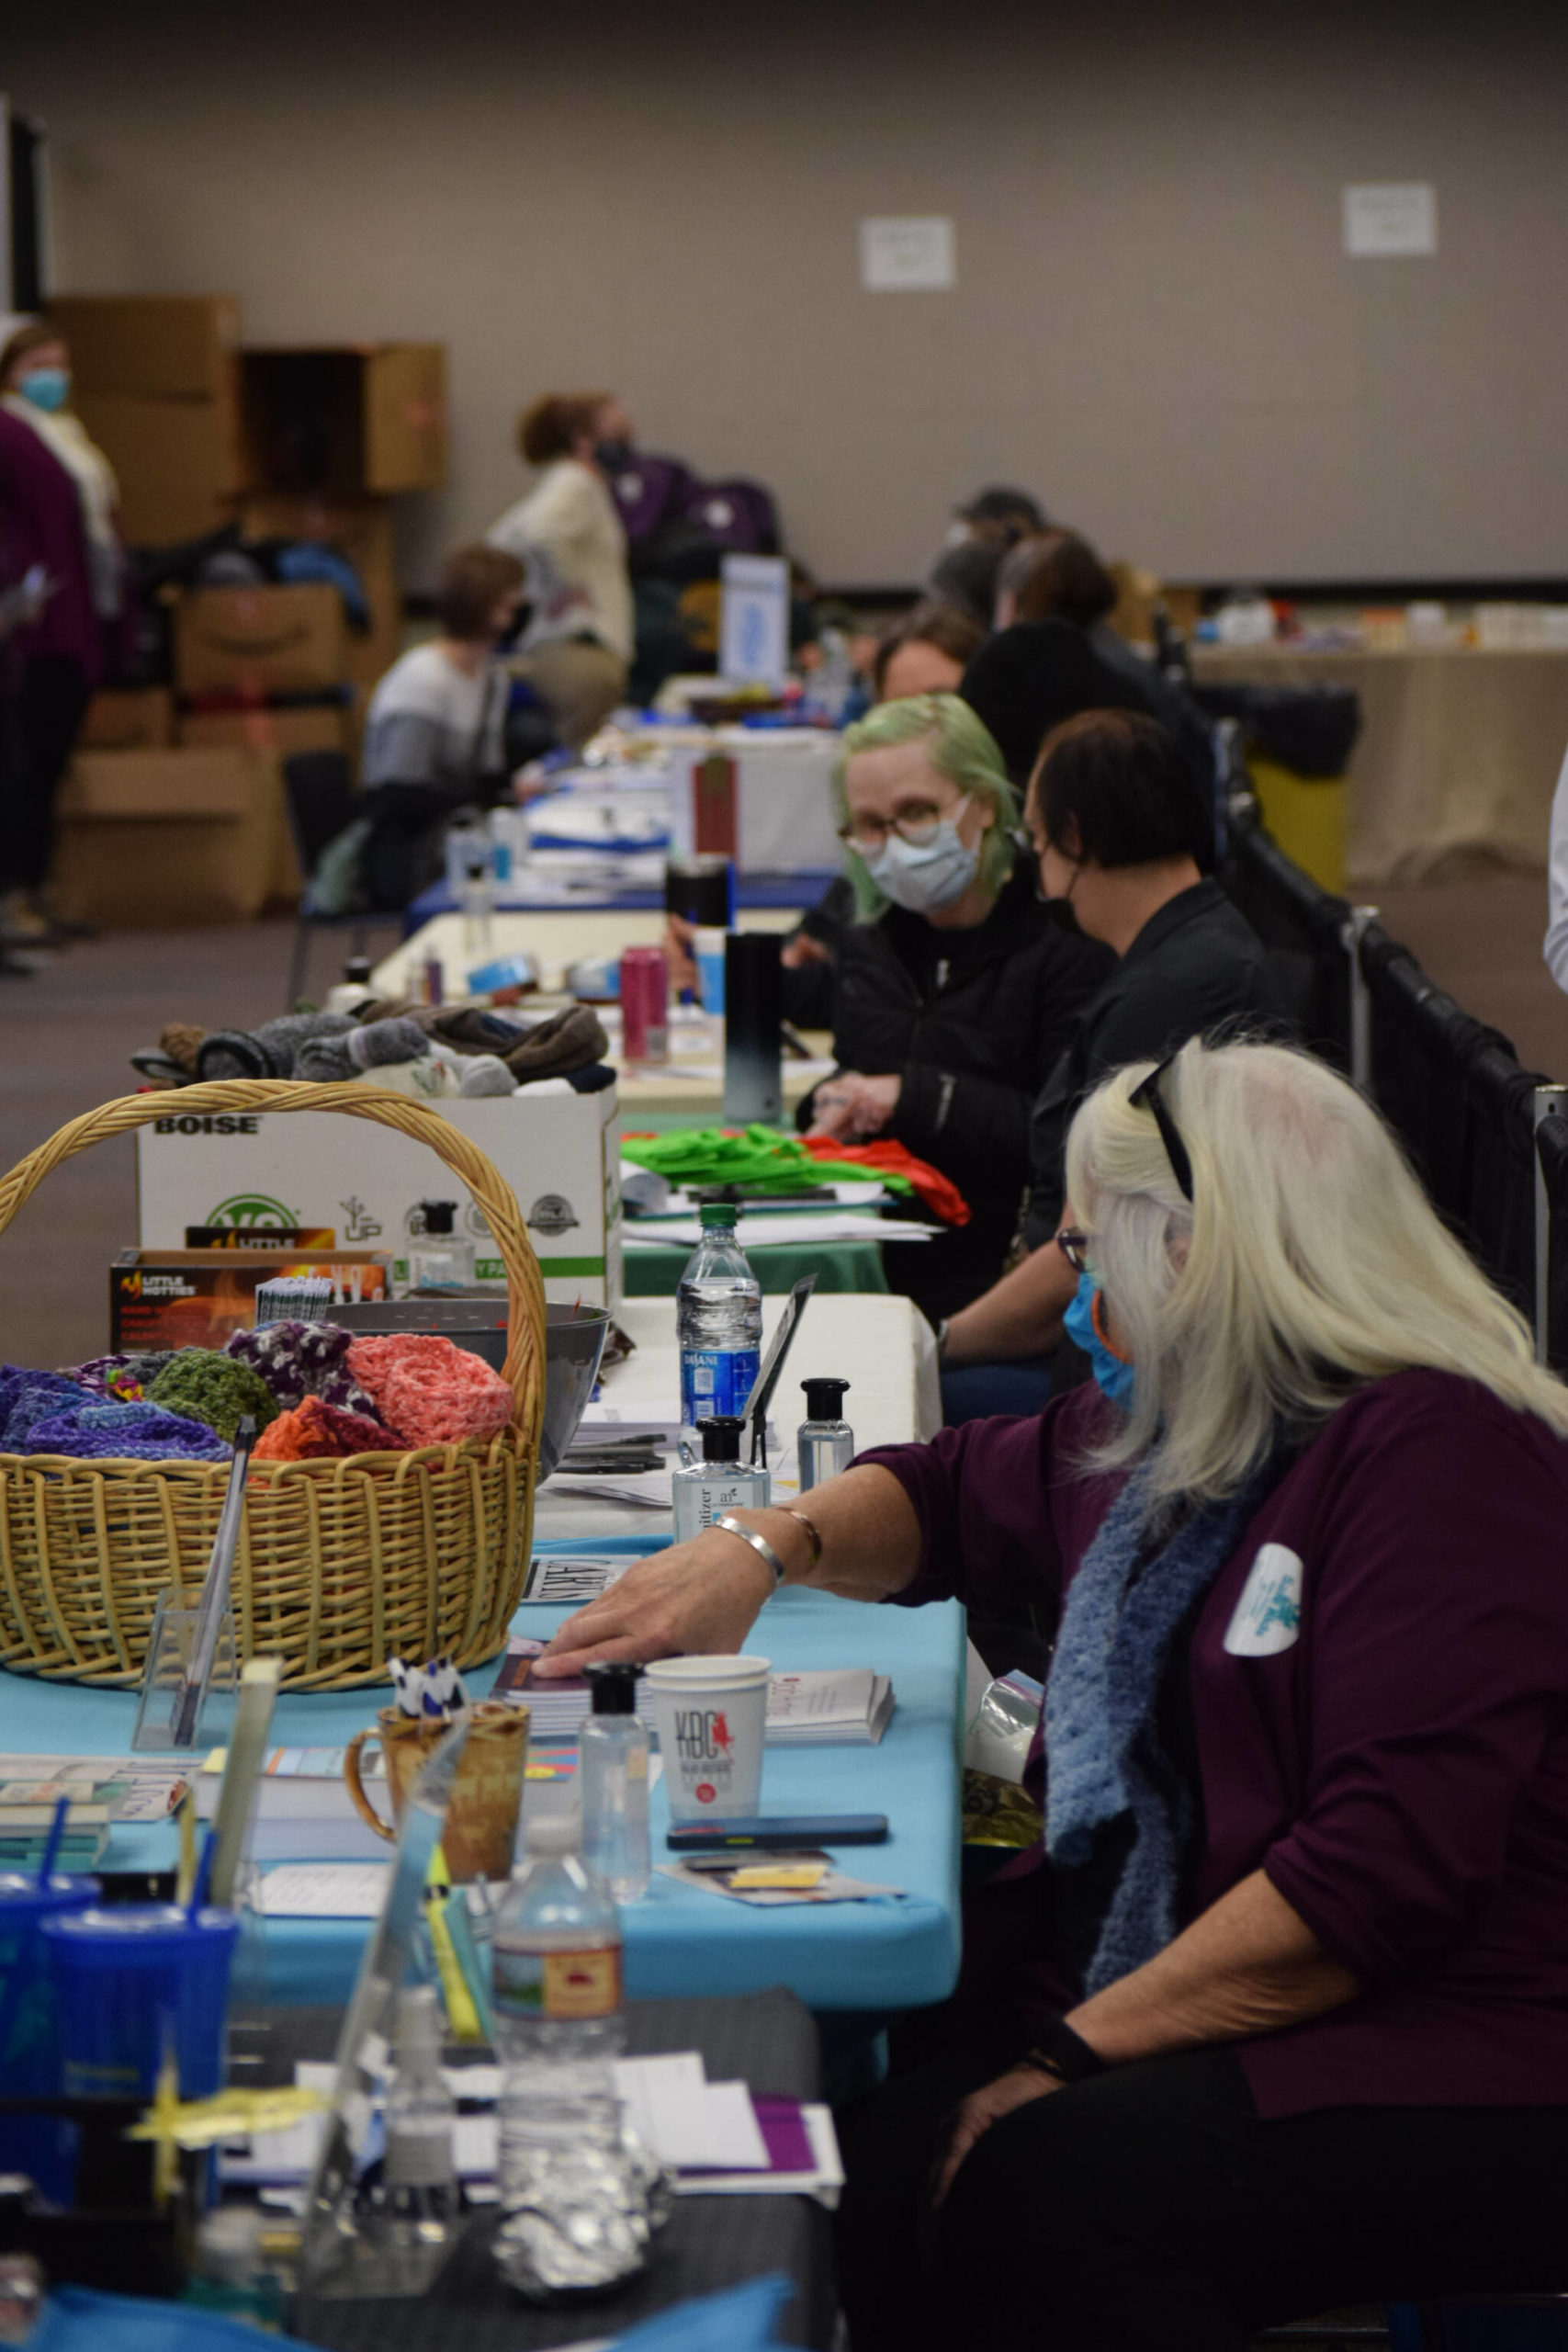 Community agencies administer social services to those in need during the Project Homeless Connect event in Soldotna on Wednesday, Jan. 26, 2022. (Camille Botello/Peninsula Clarion)